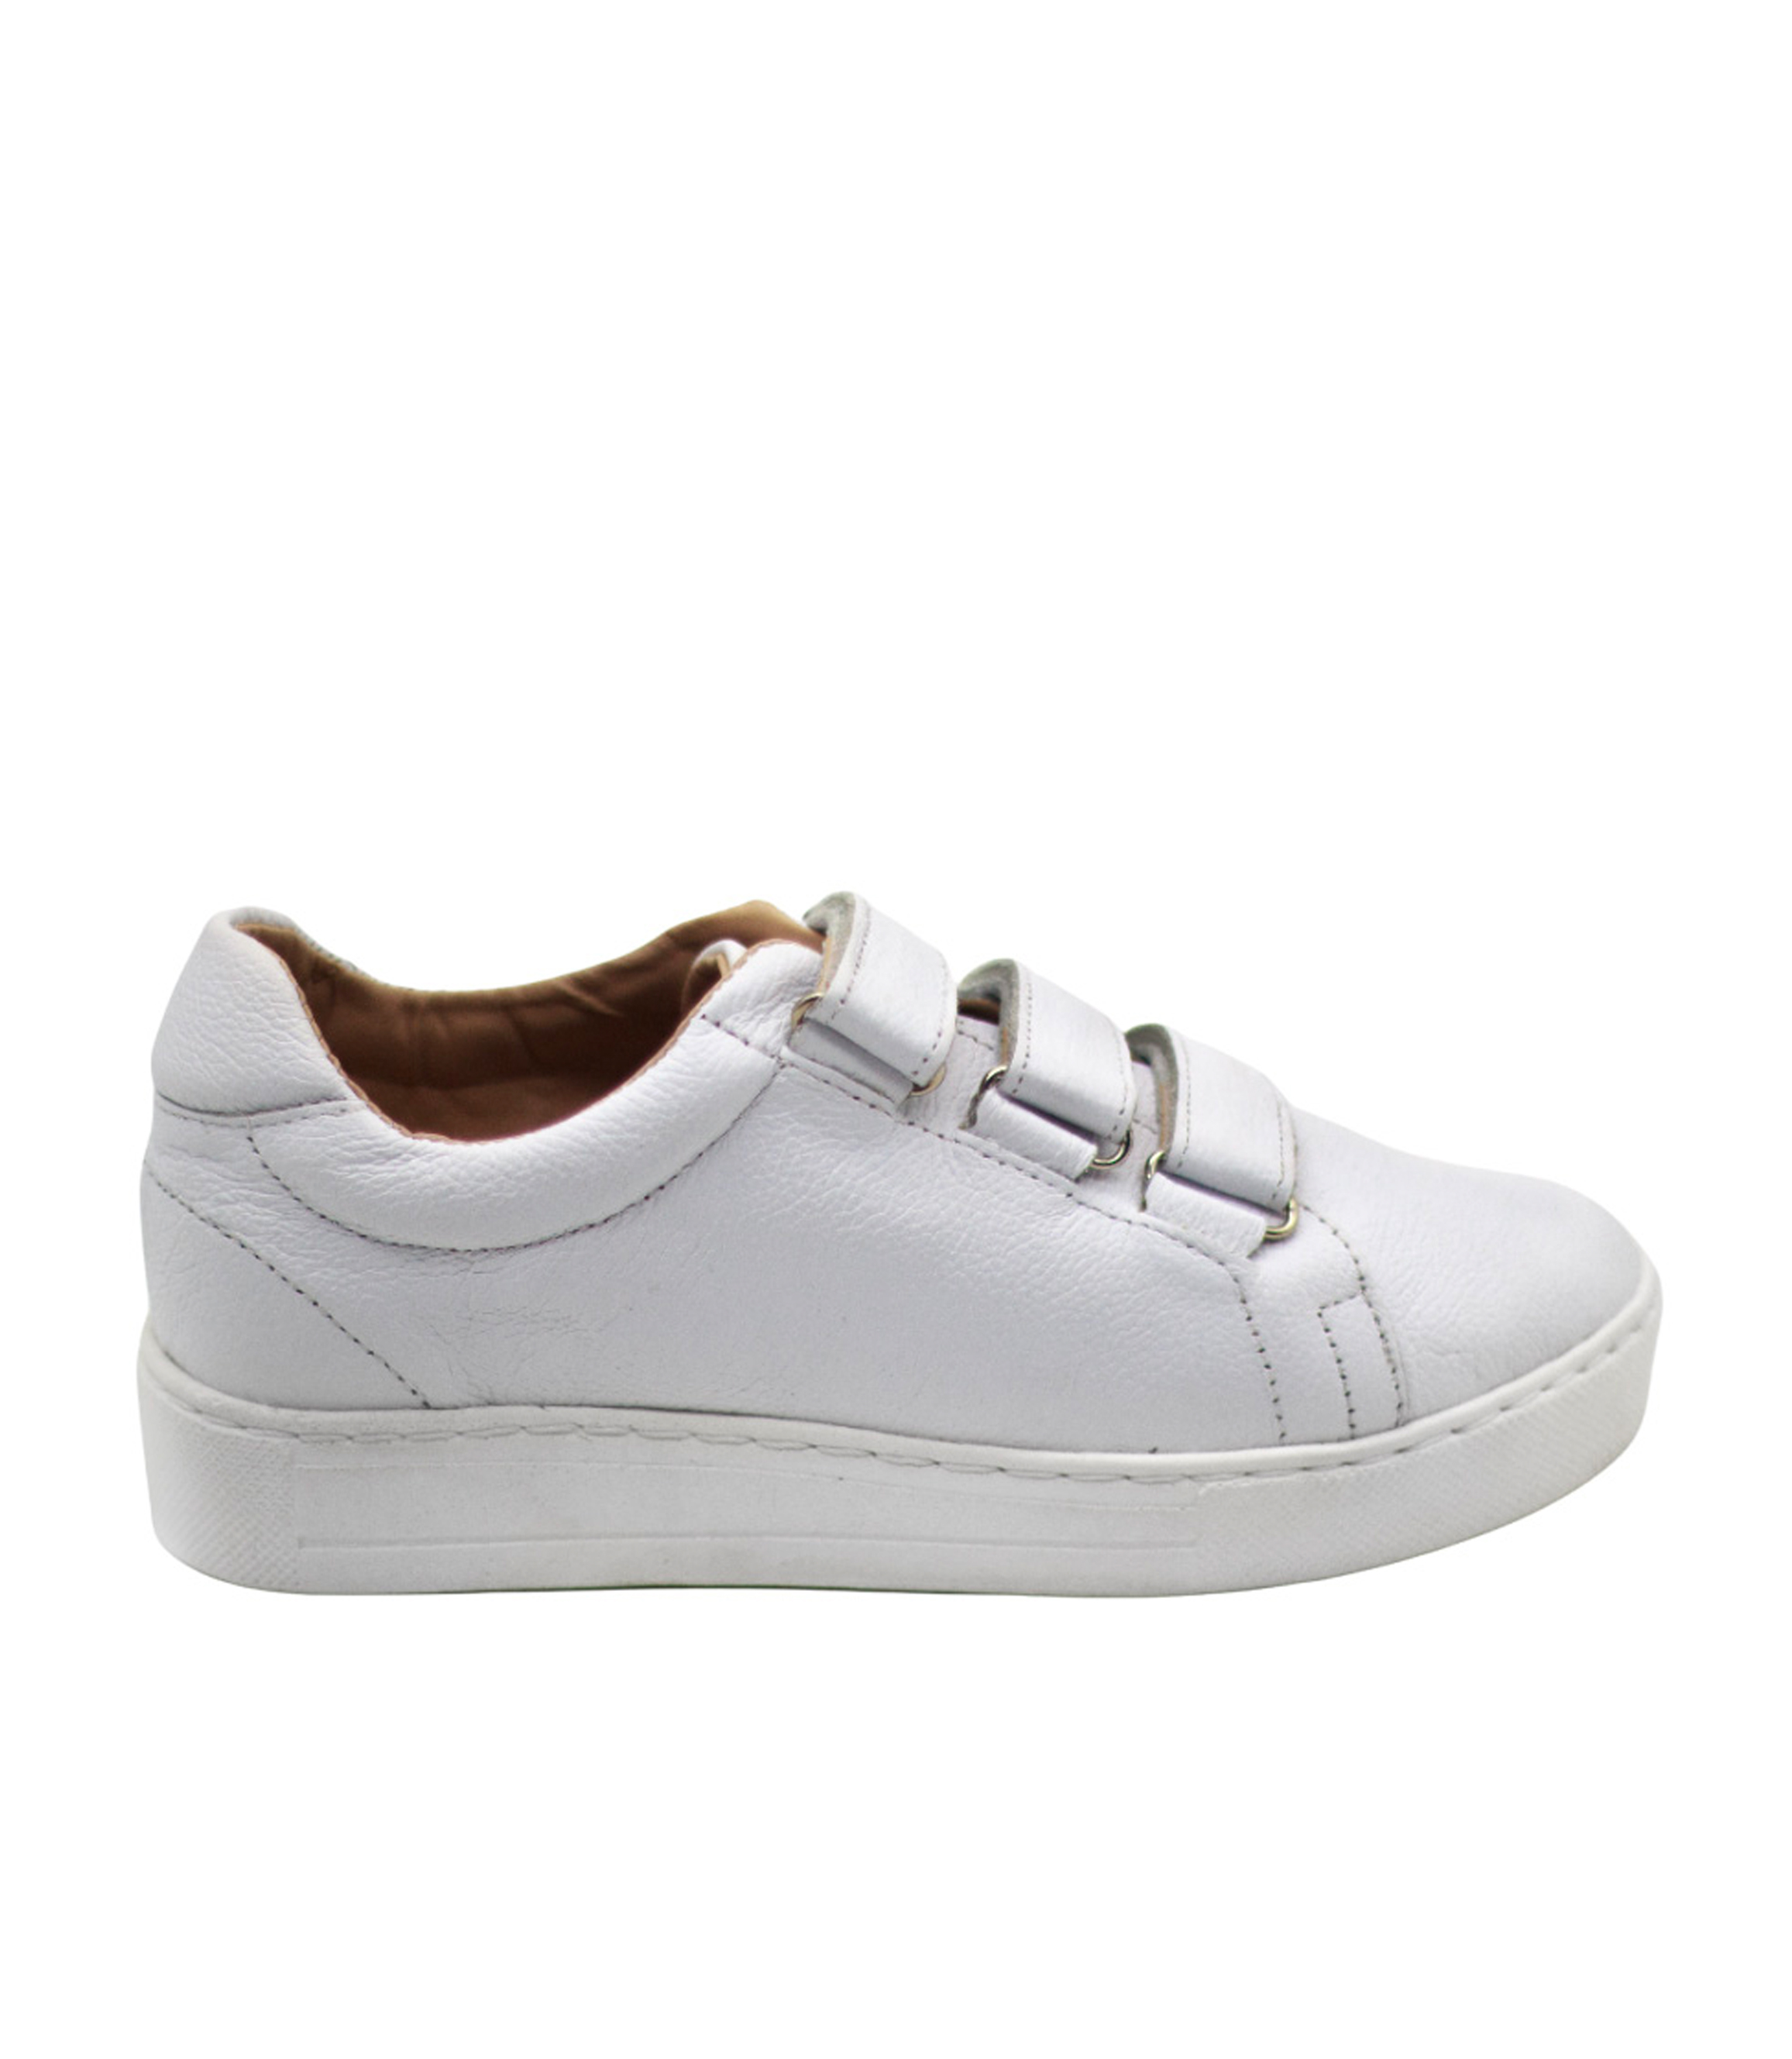 ANGEL SOFT WHITE VALERY SNEAKERS | Rosella - Style inspired by elegance